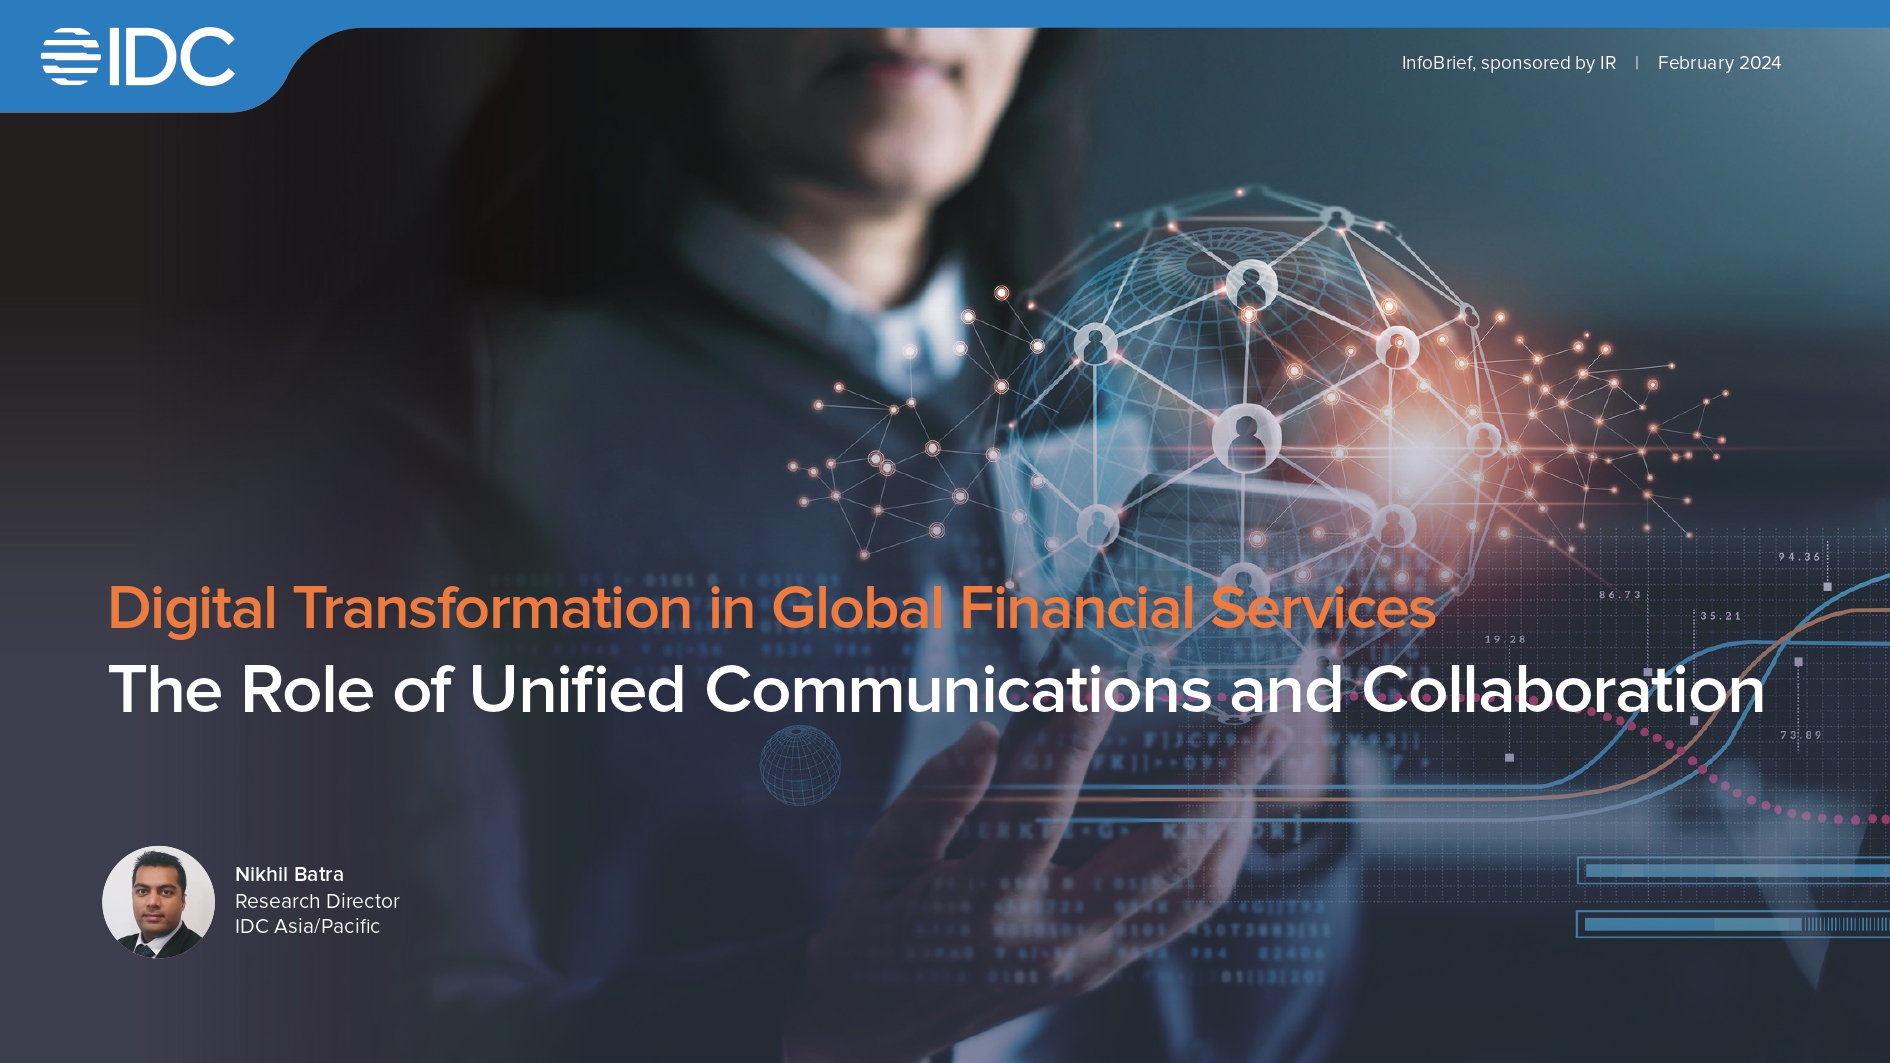 Digital Transformation in Global Financial Services: The Role of Unified Communications and Collaboration